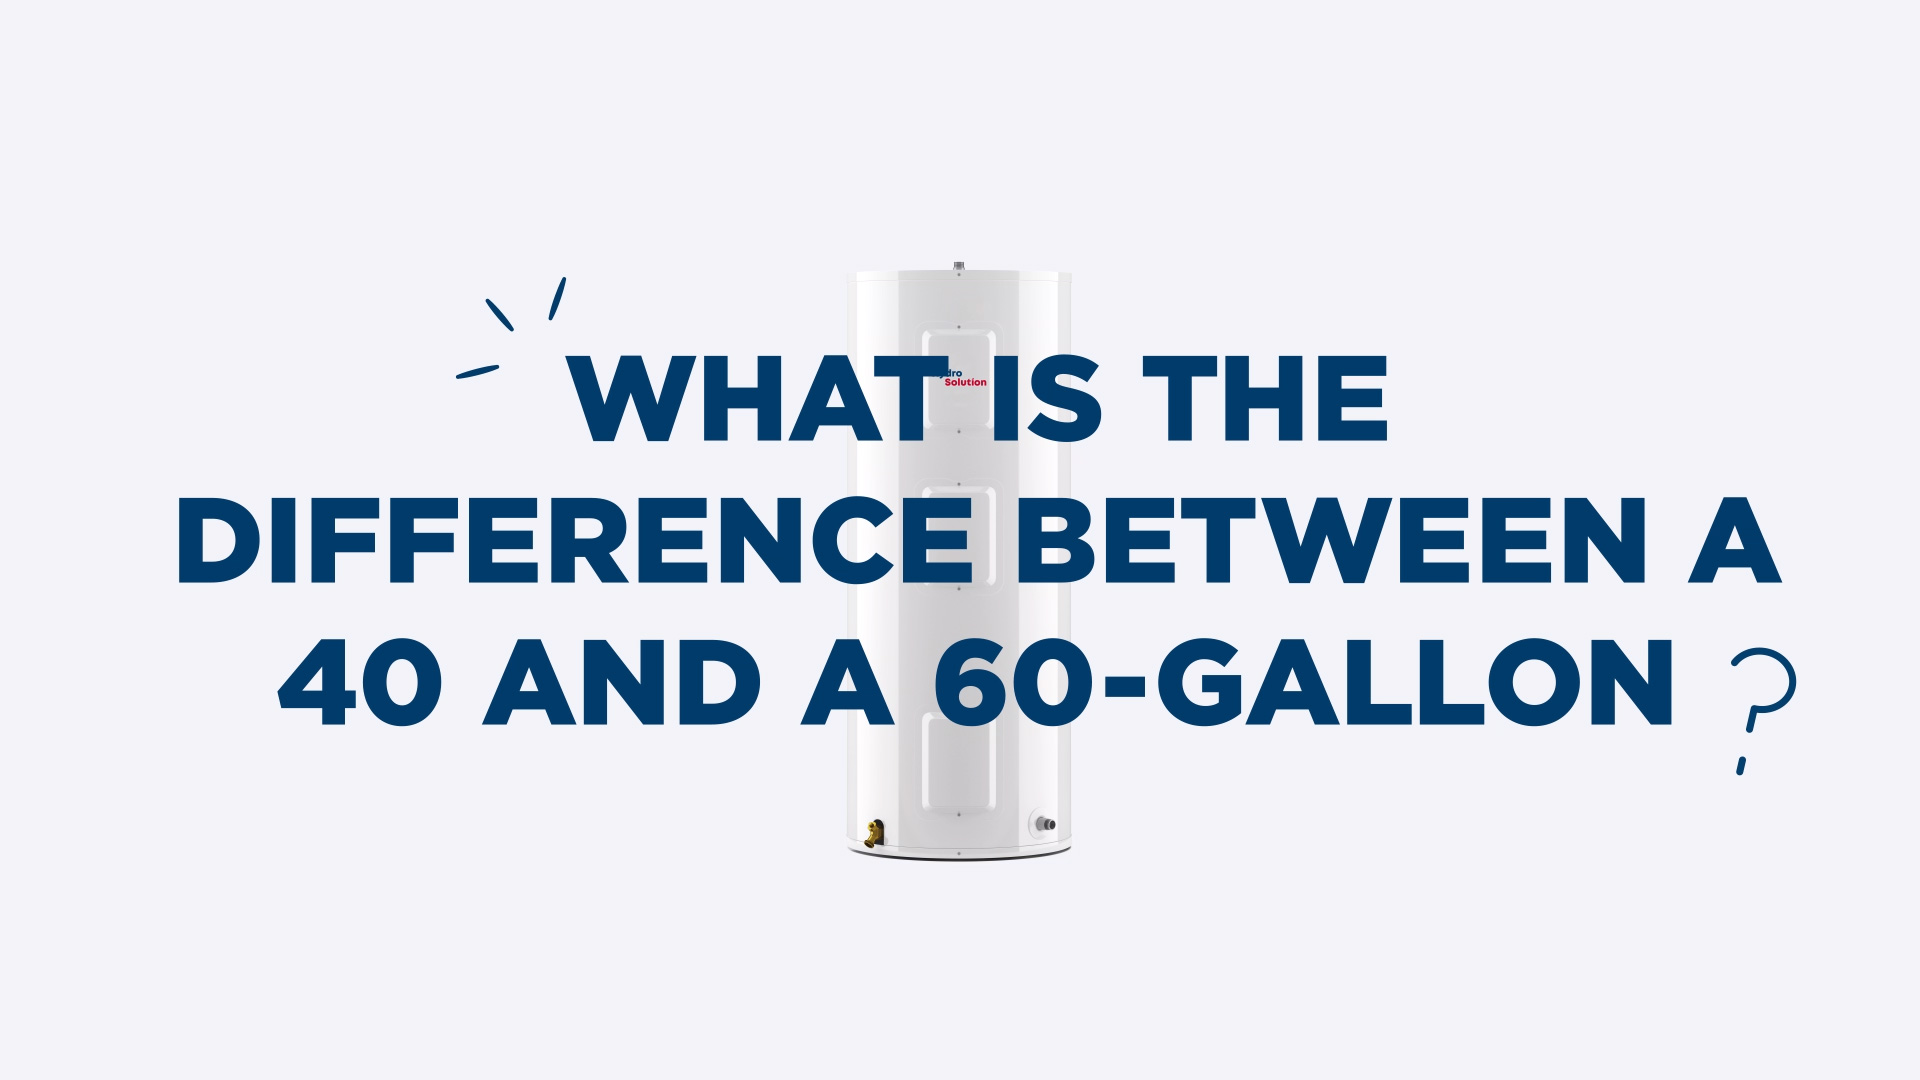 What is the difference between a 40-gallon water heater, a 60-gallon water heater, and the EcoPeak® model?